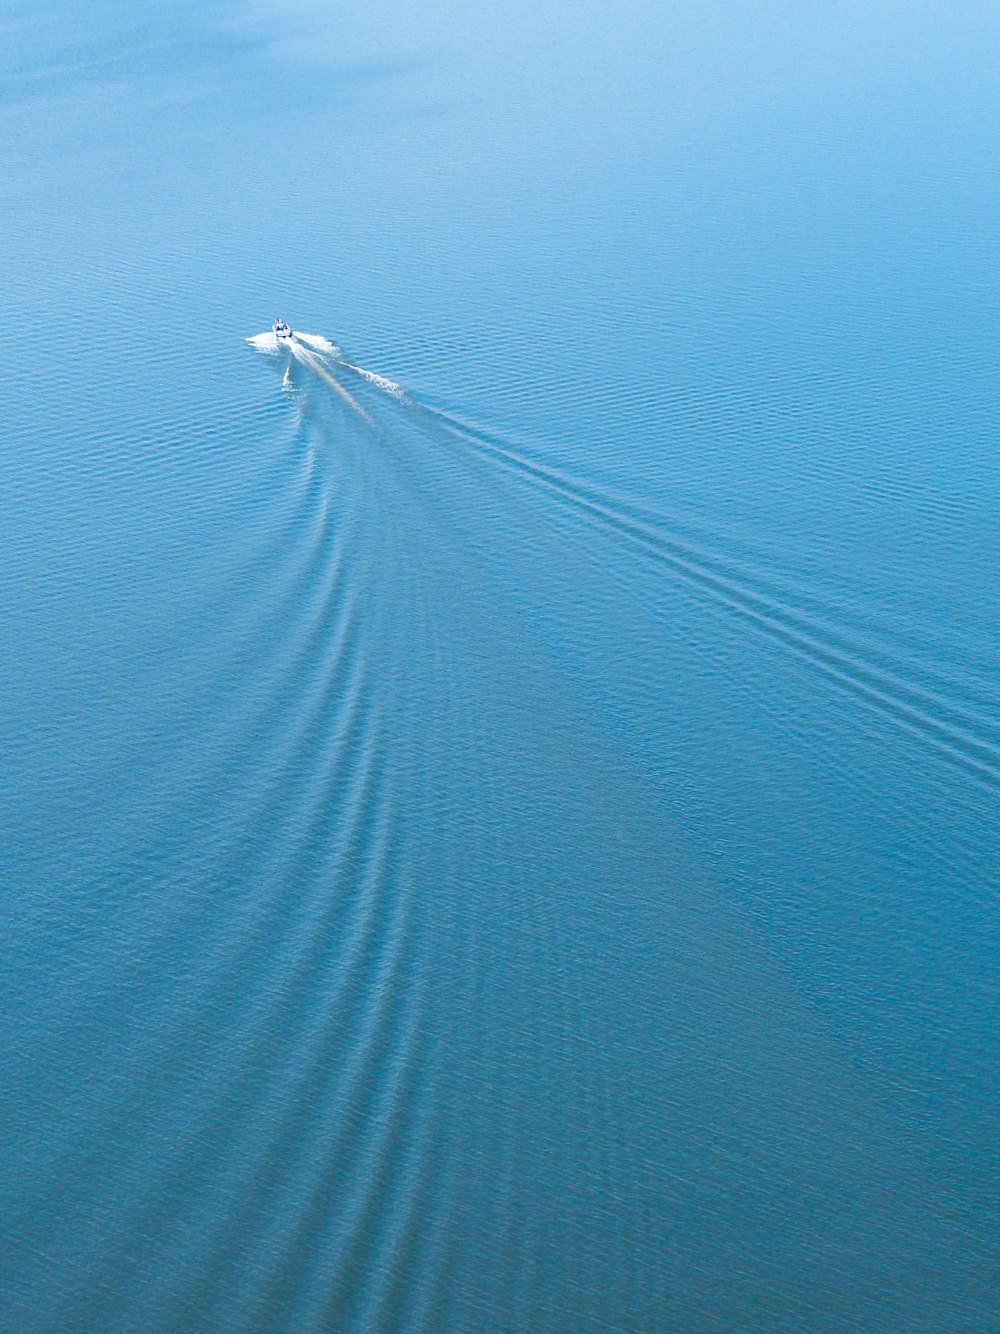 a boat is traveling across the water